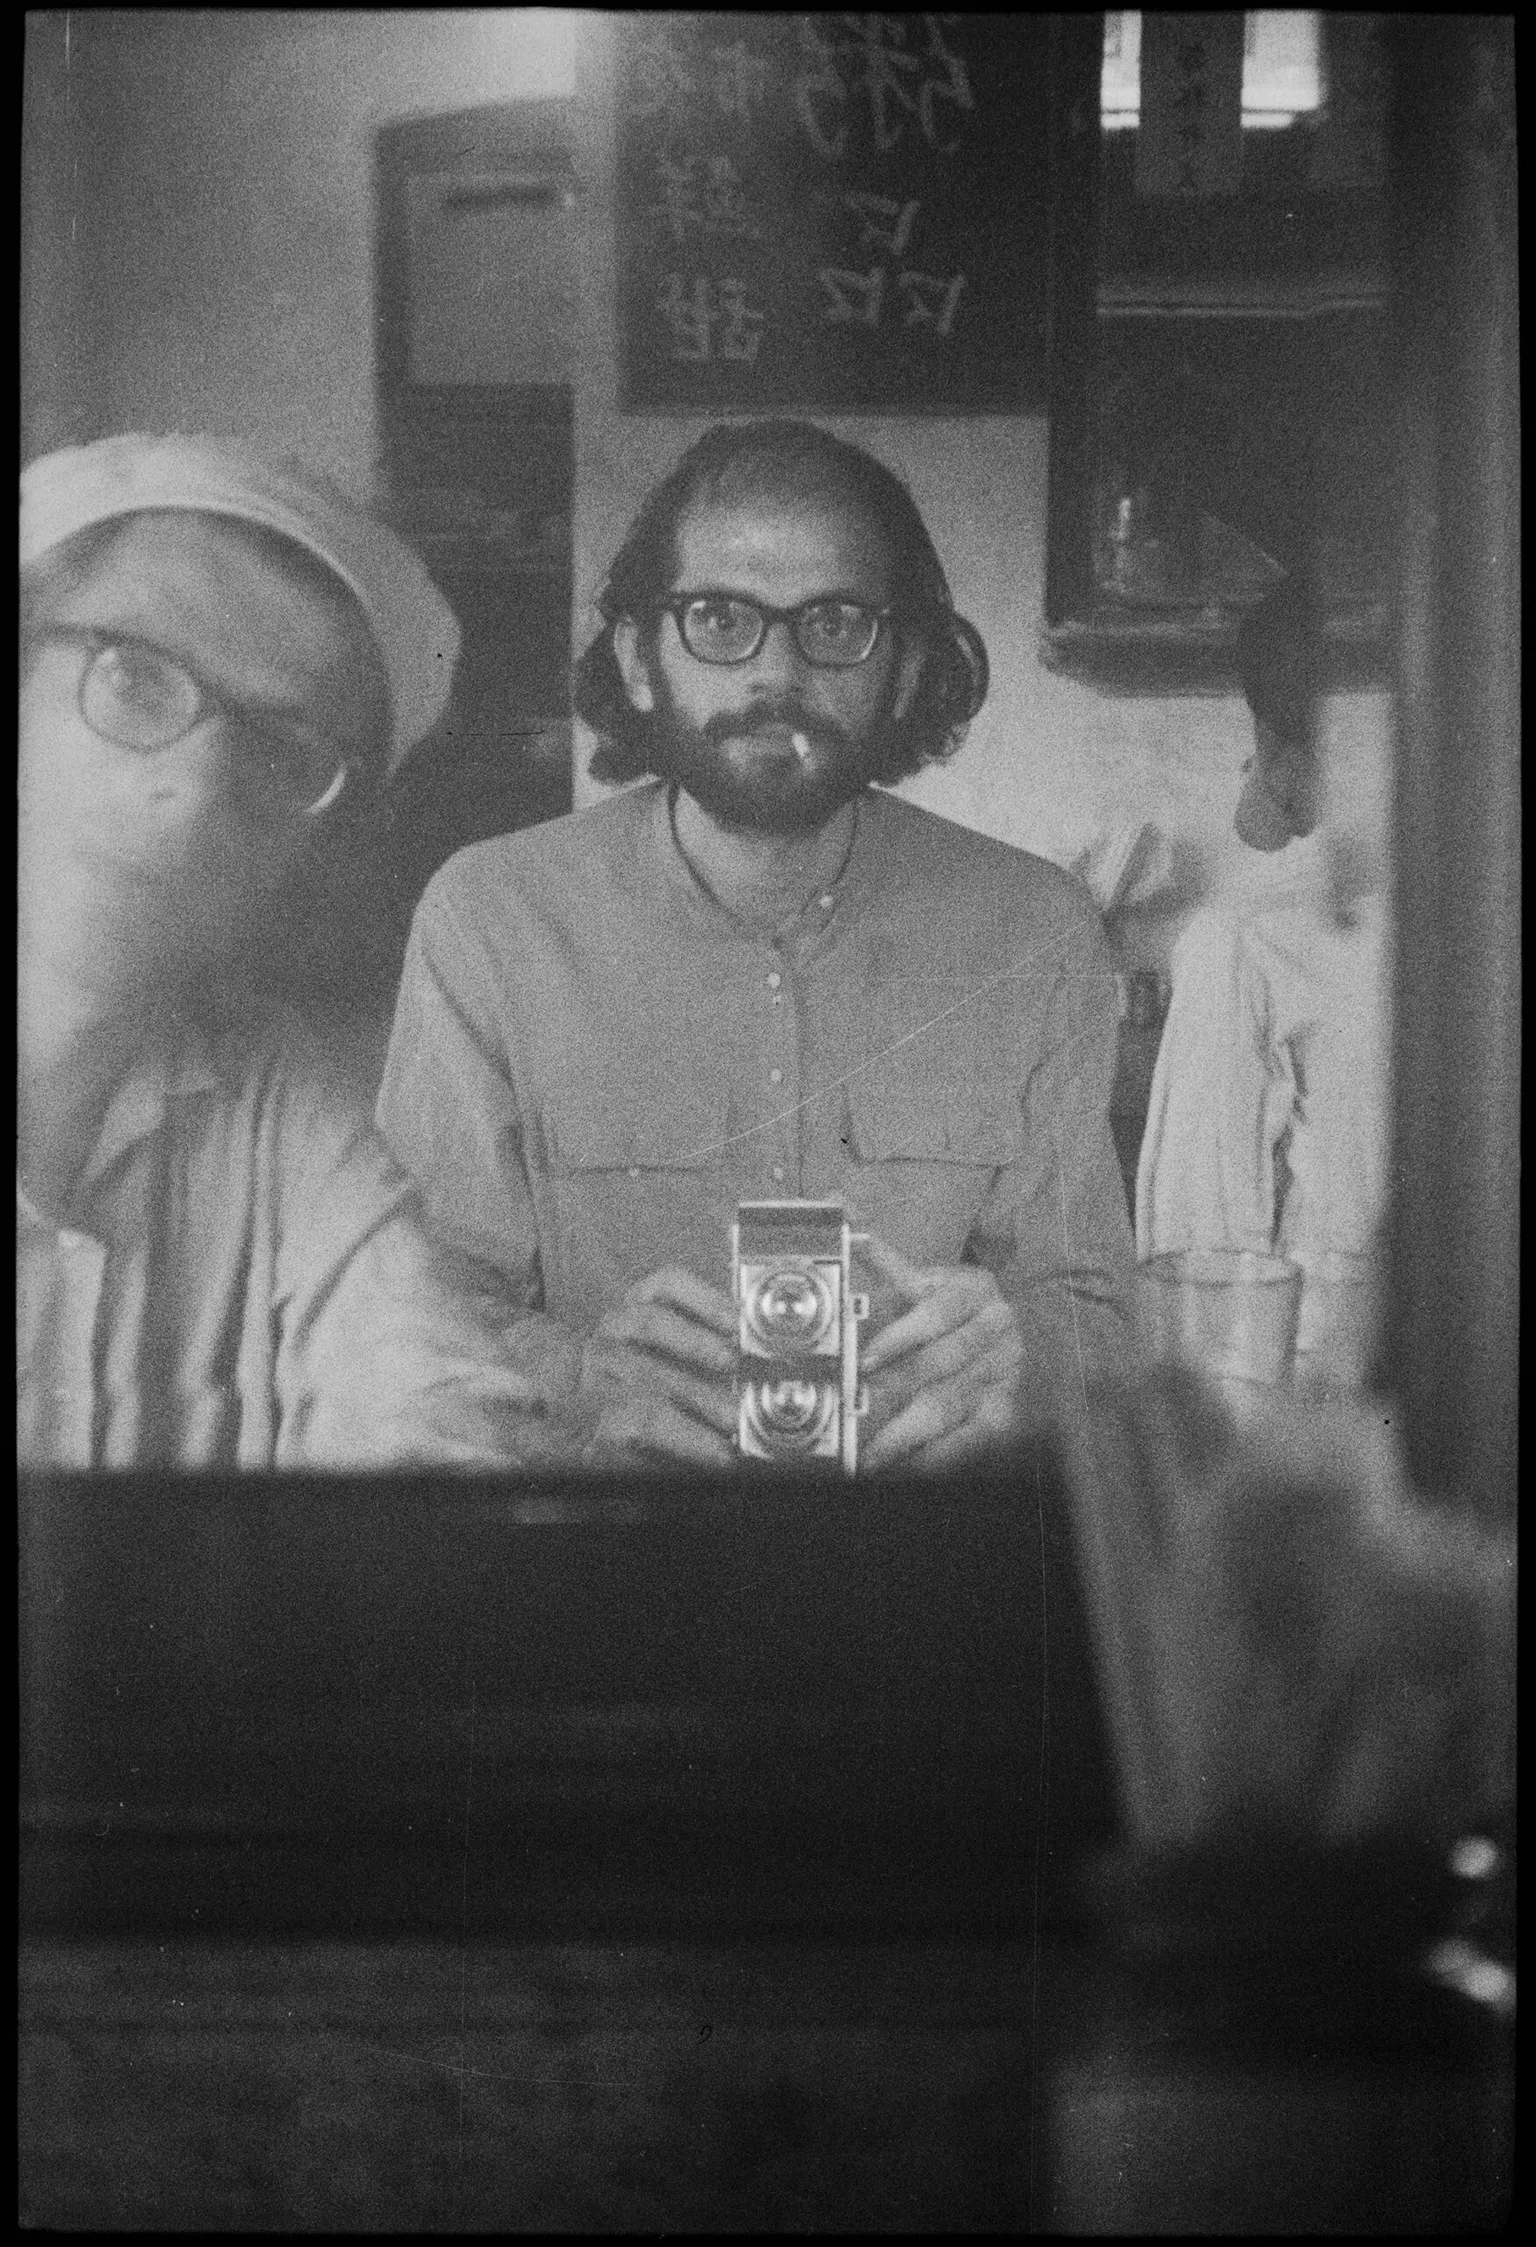 "Calcutta Self Portrait with Peter Orlovsky, October 20, 1962." Photo: Allen Ginsberg, courtesy of Fahey/Klein Gallery, Los Angeles.